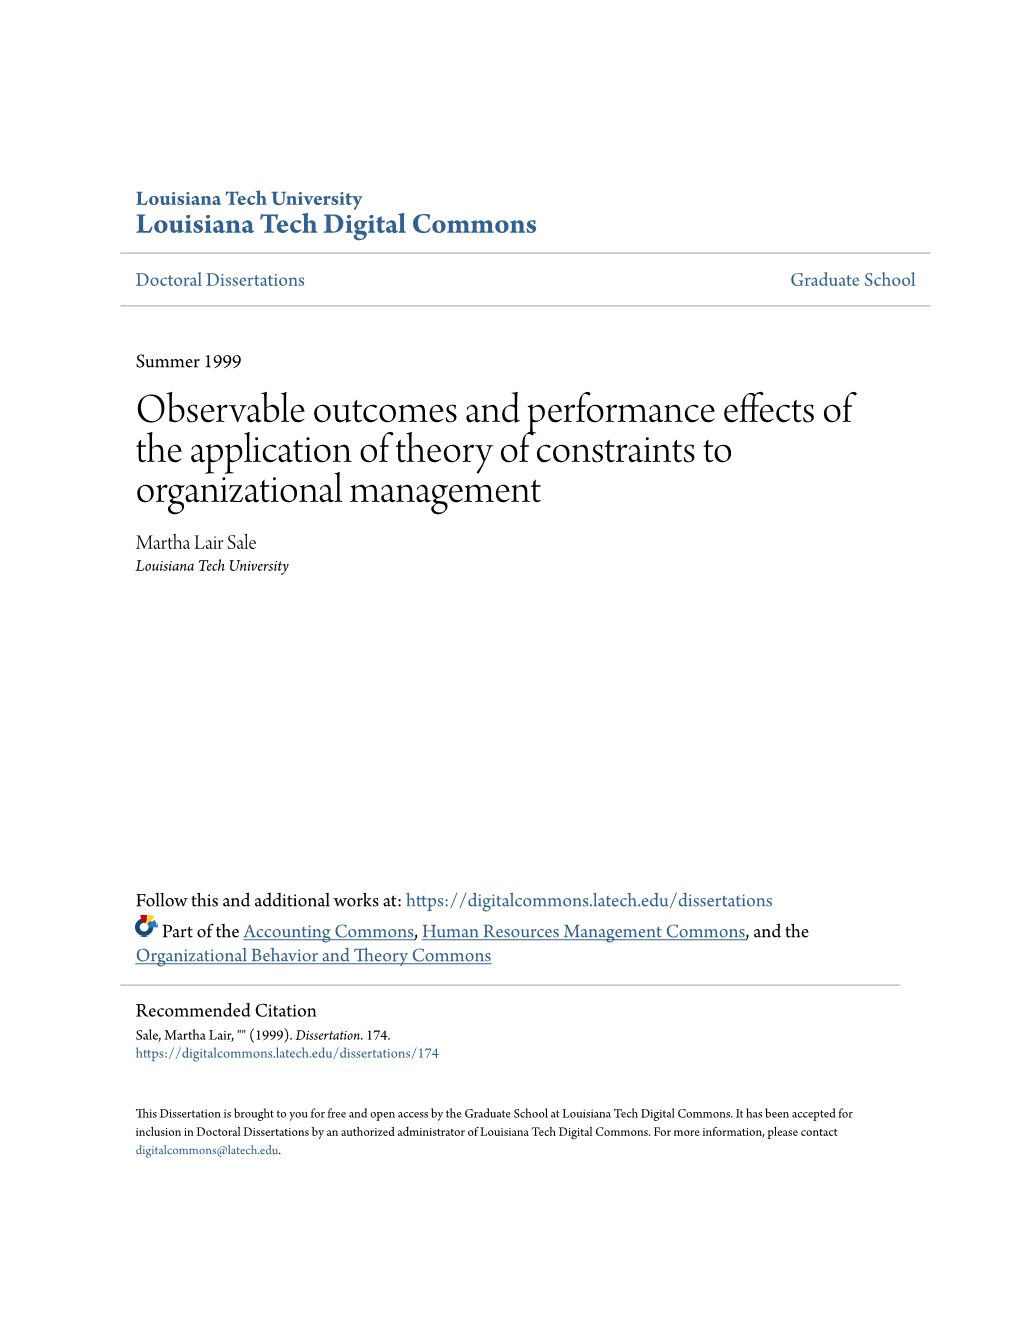 Observable Outcomes and Performance Effects of the Application of Theory of Constraints to Organizational Management Martha Lair Sale Louisiana Tech University